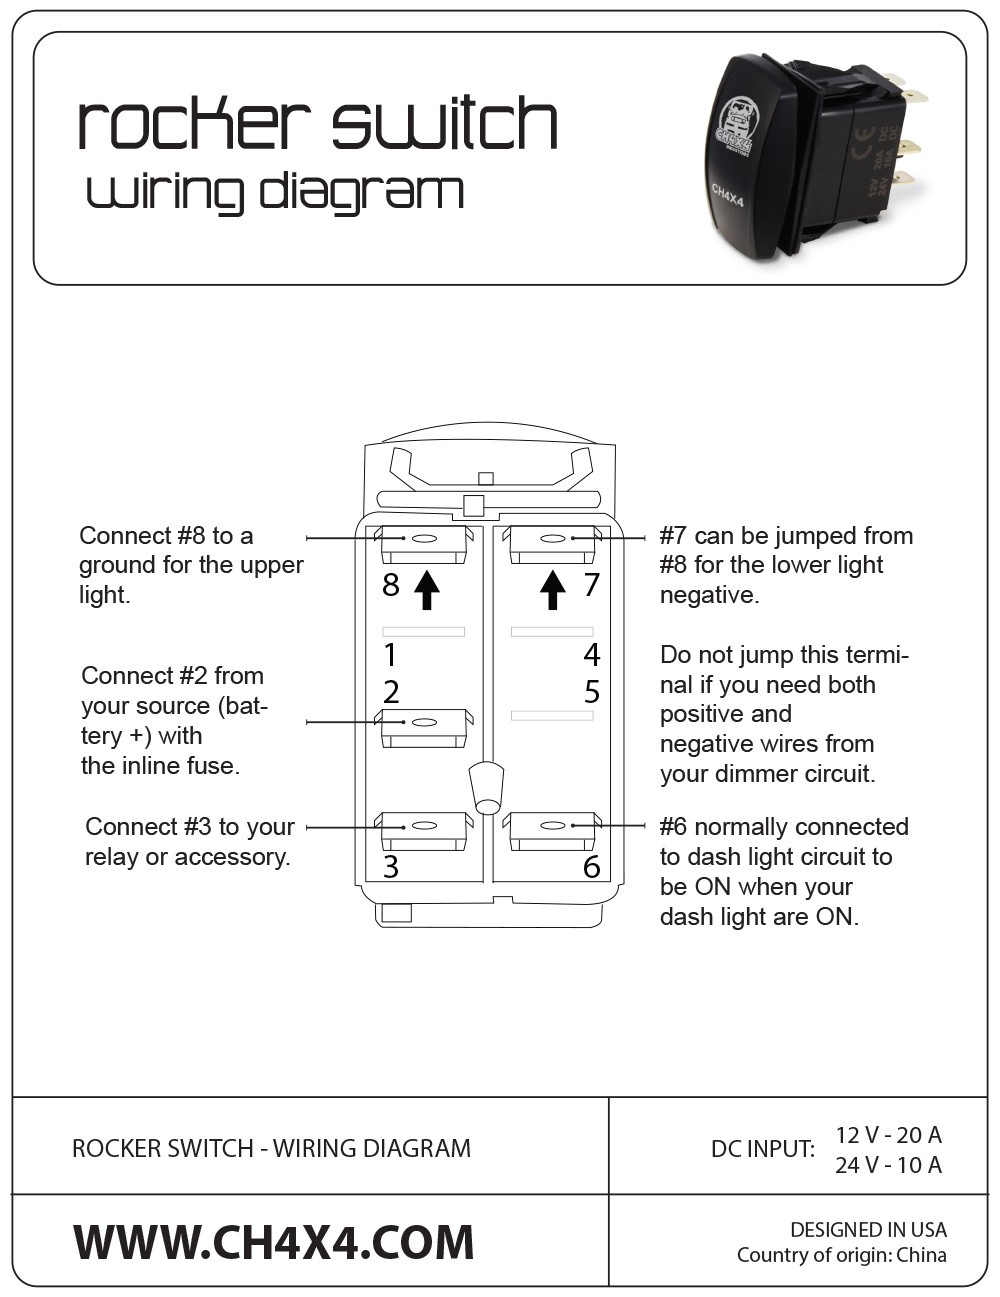 12 Volt toggle Switch Wiring Diagrams Download Rocker Switch Wiring Diagrams Automotive Schematics And Led